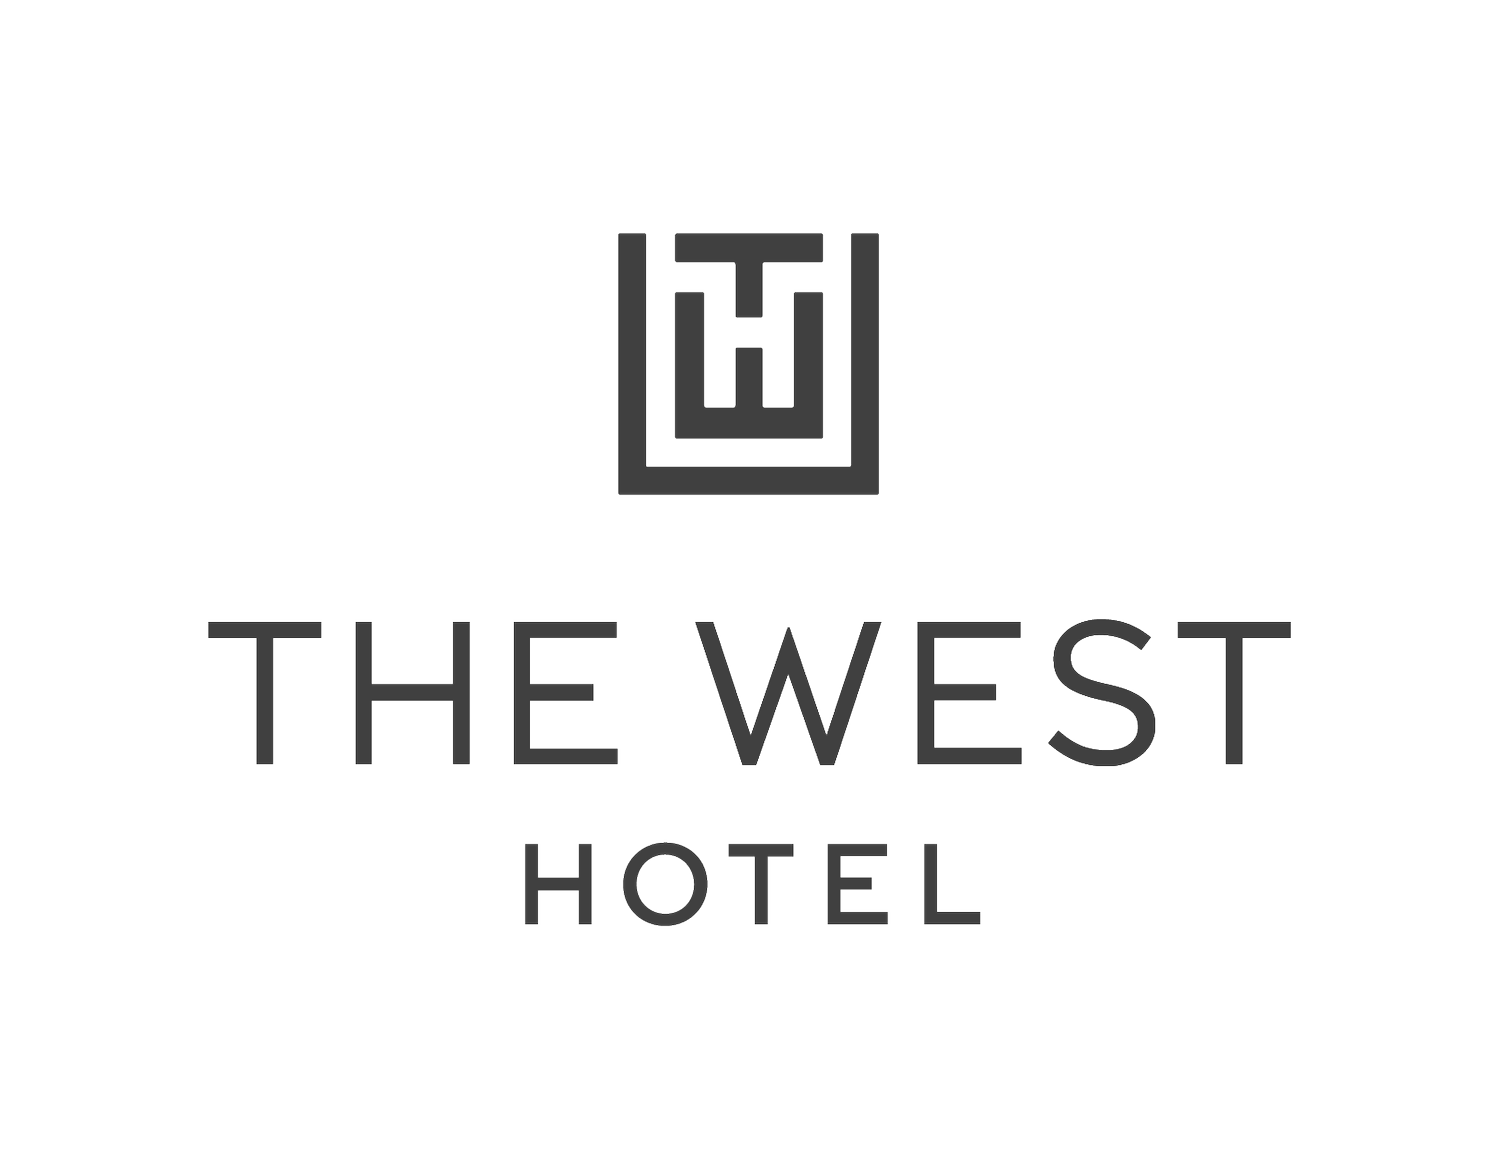 The West Hotel  |  Coming Soon to Minneapolis